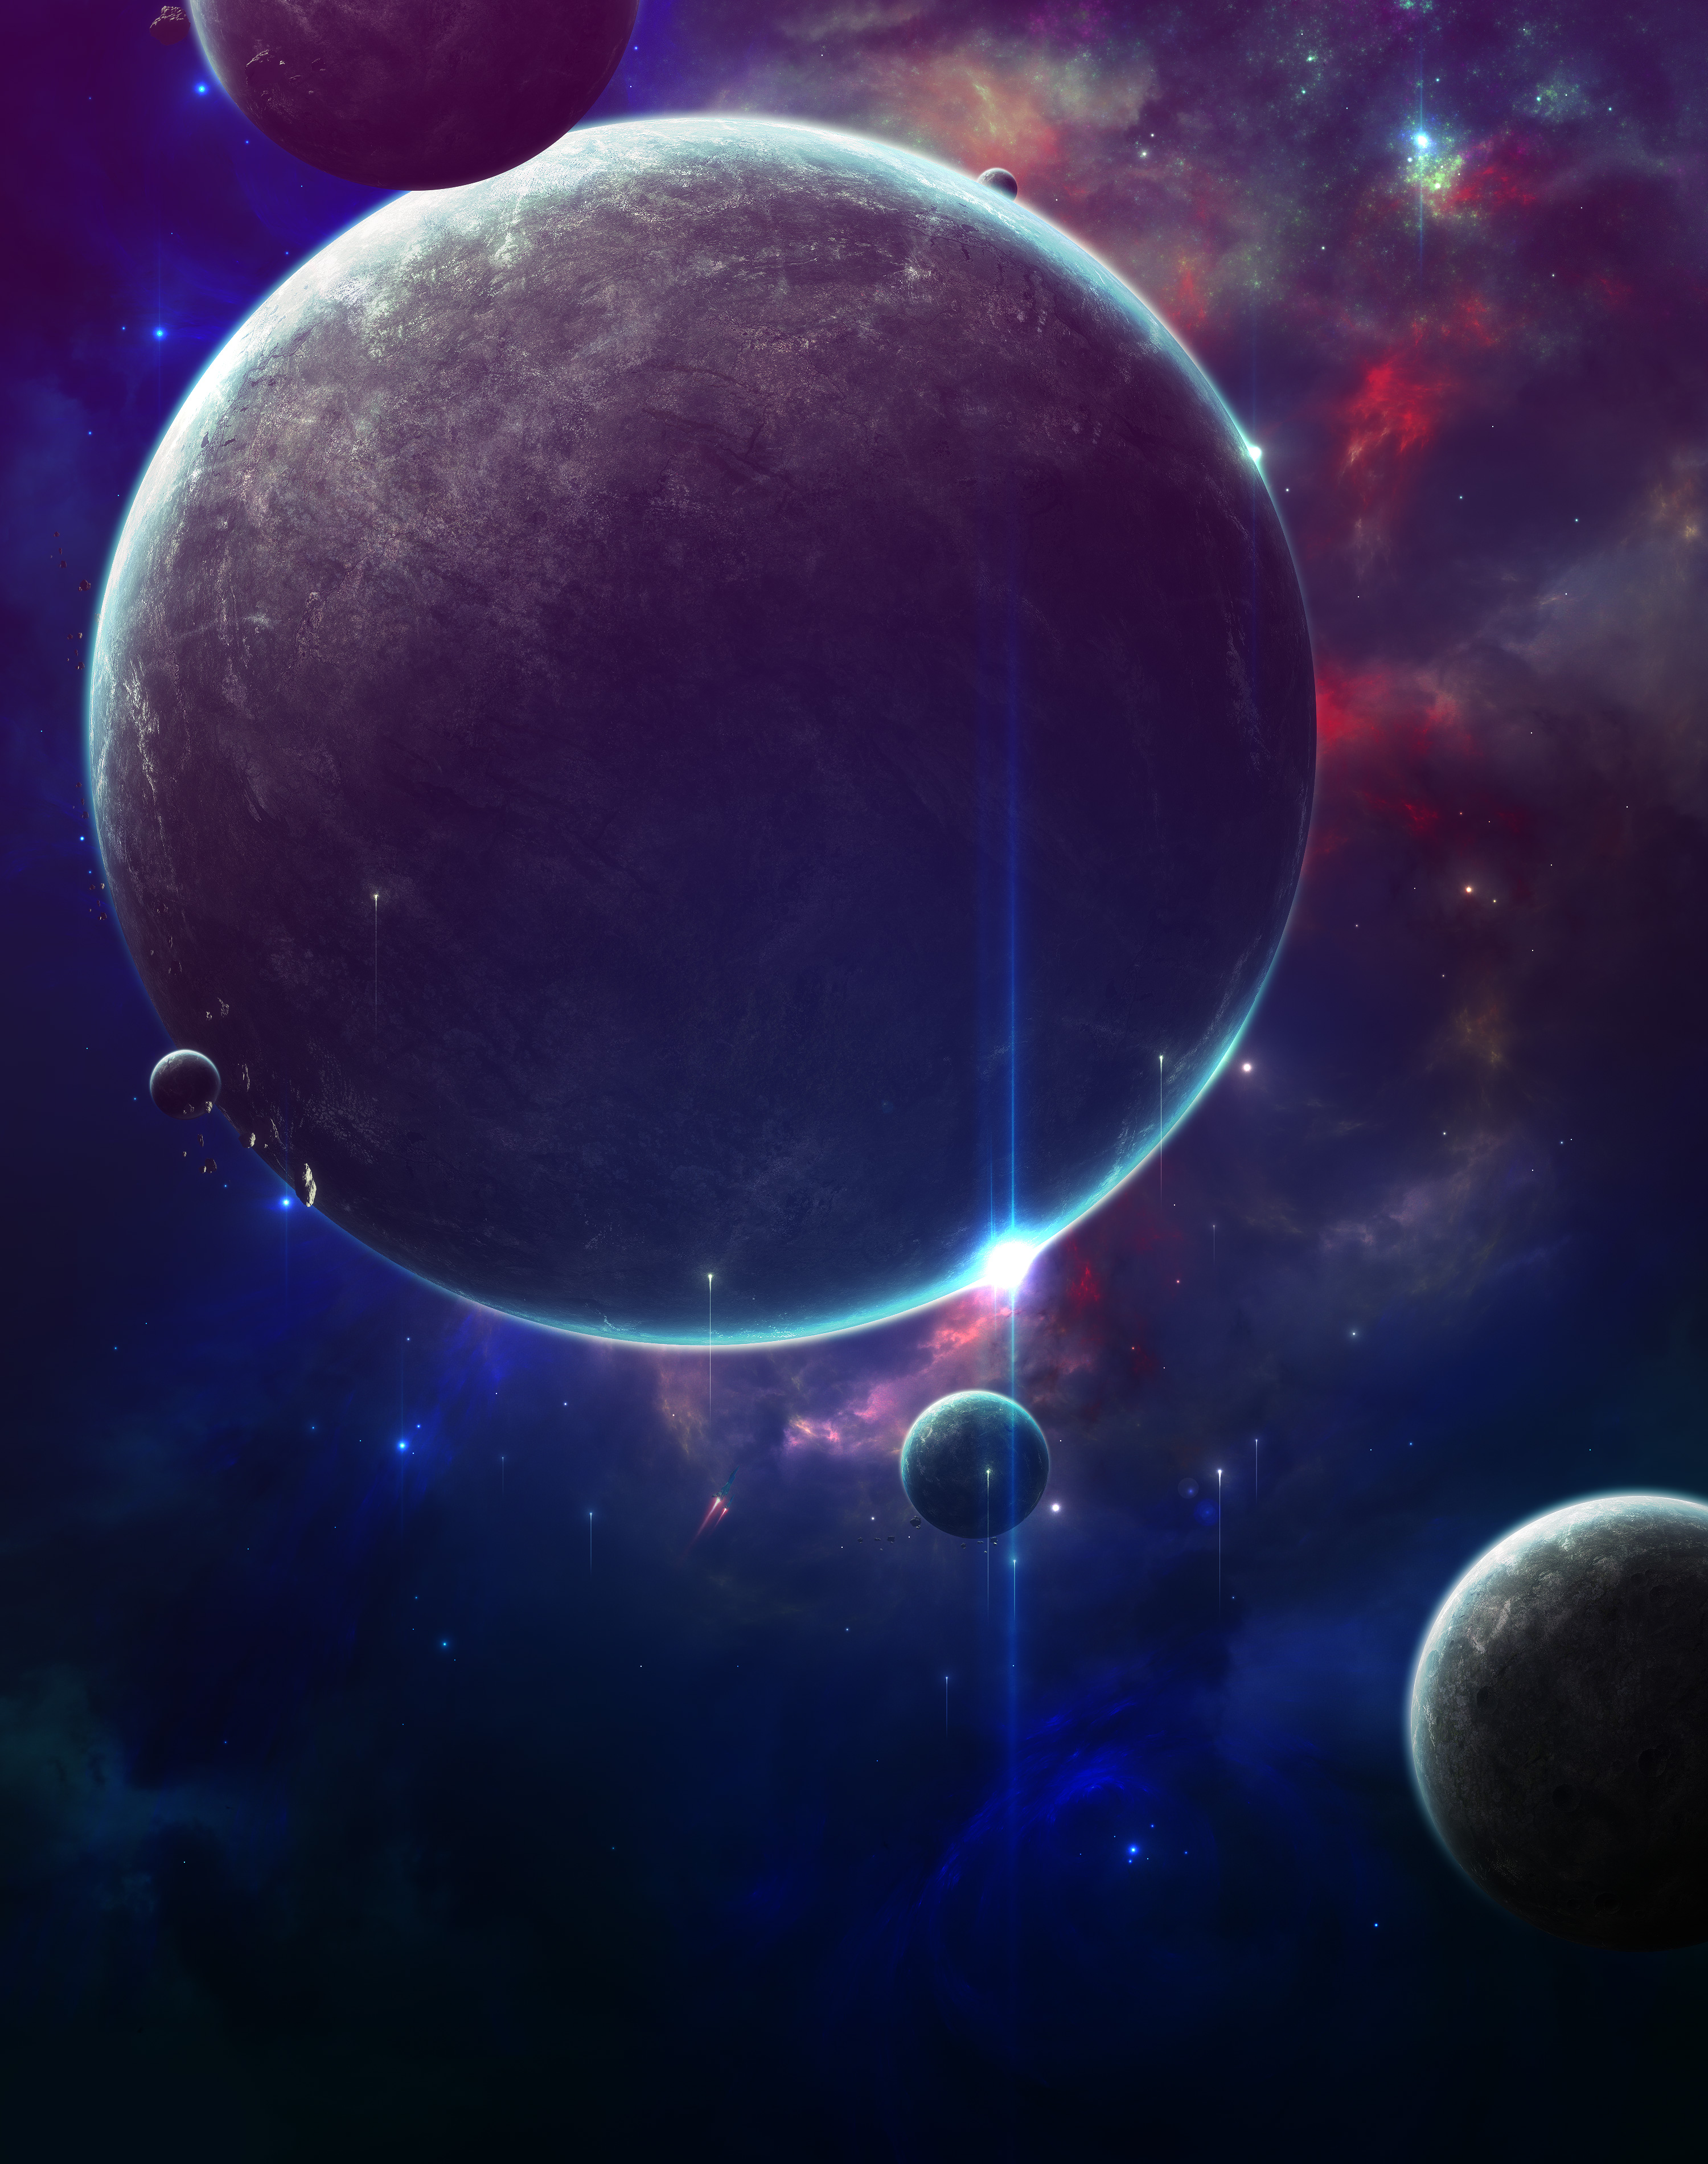 flash, shining, planets, universe wallpaper for mobile